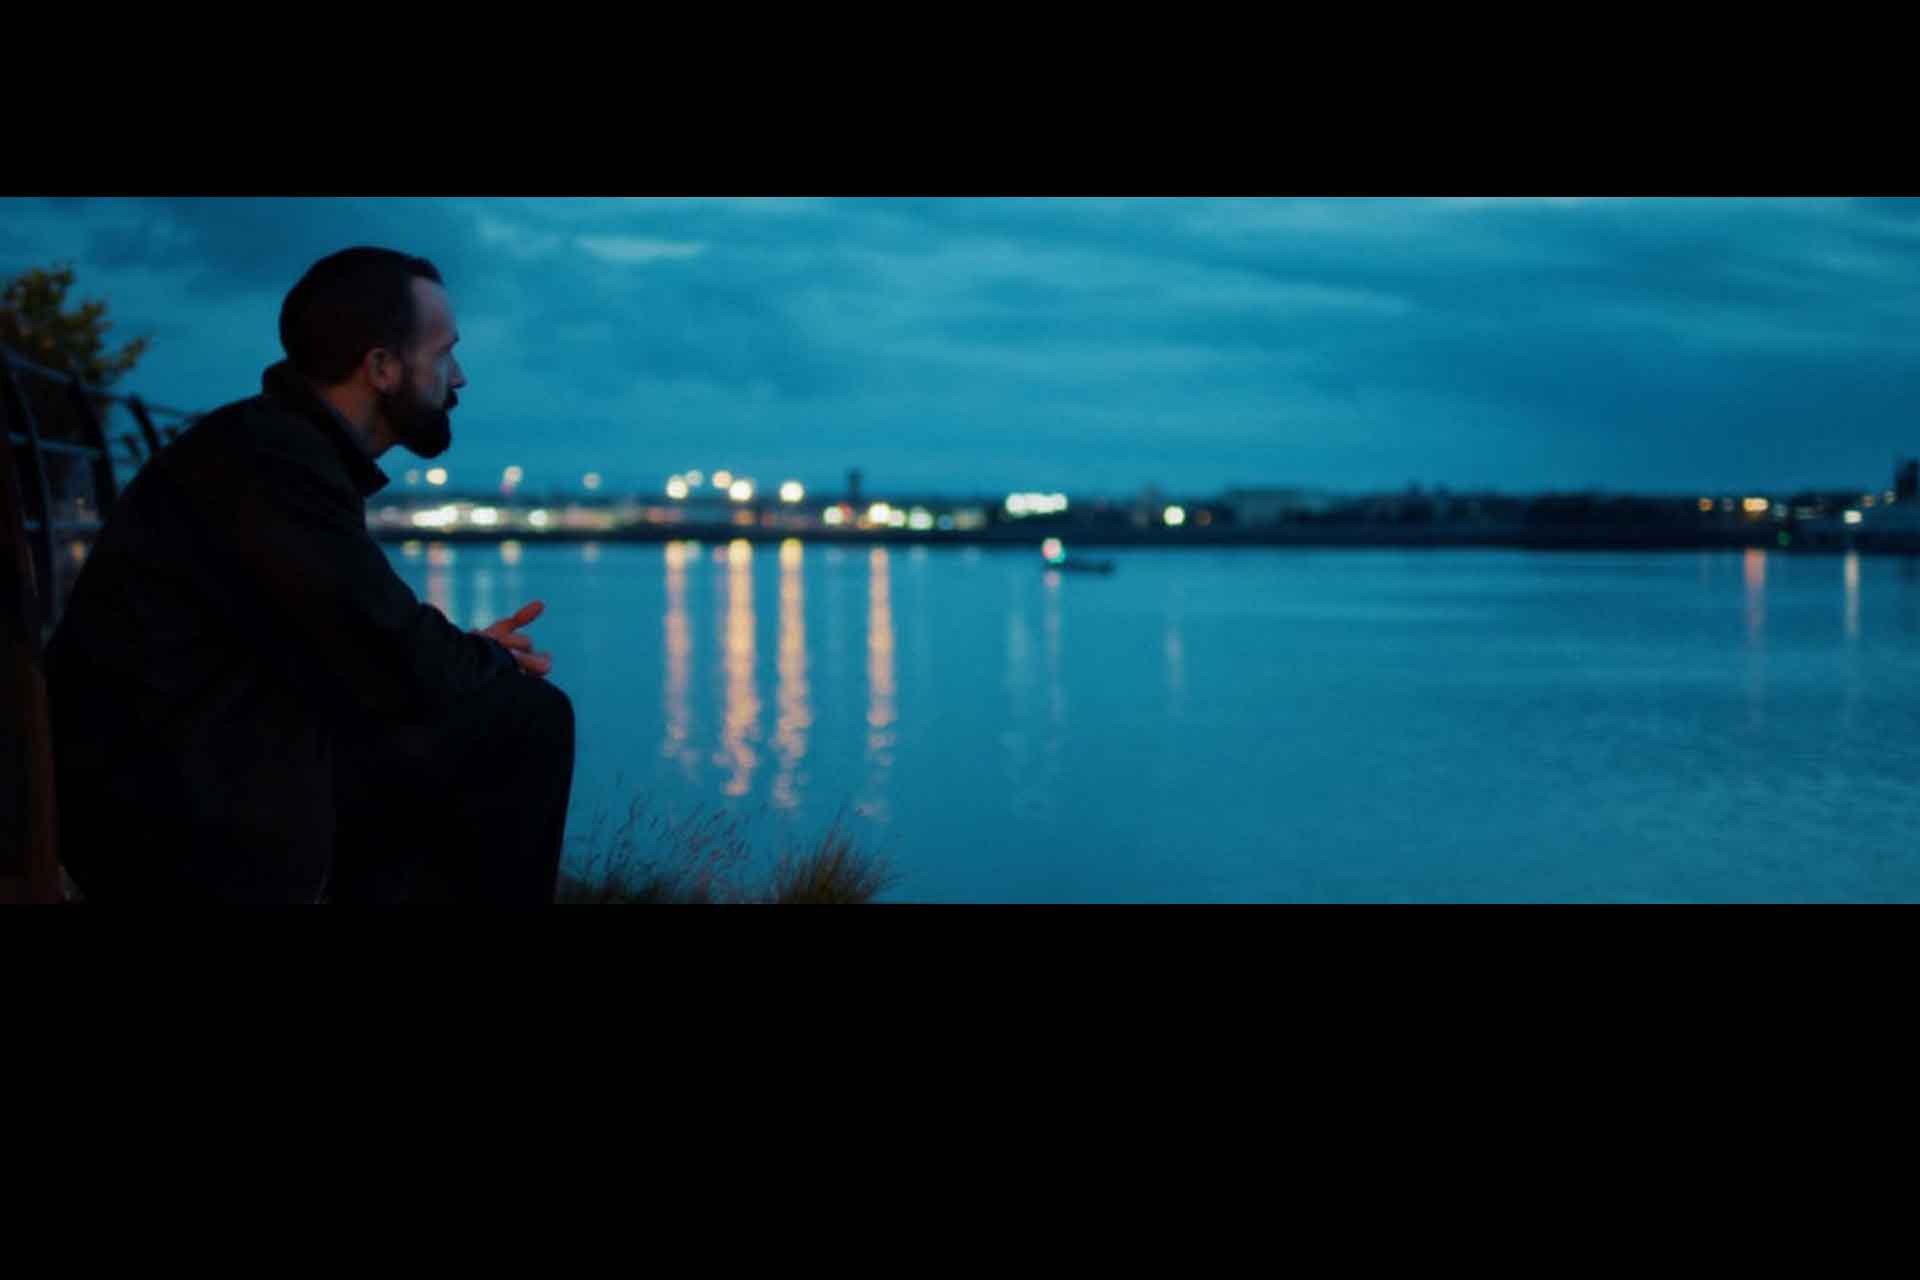 A man looking across a river at night